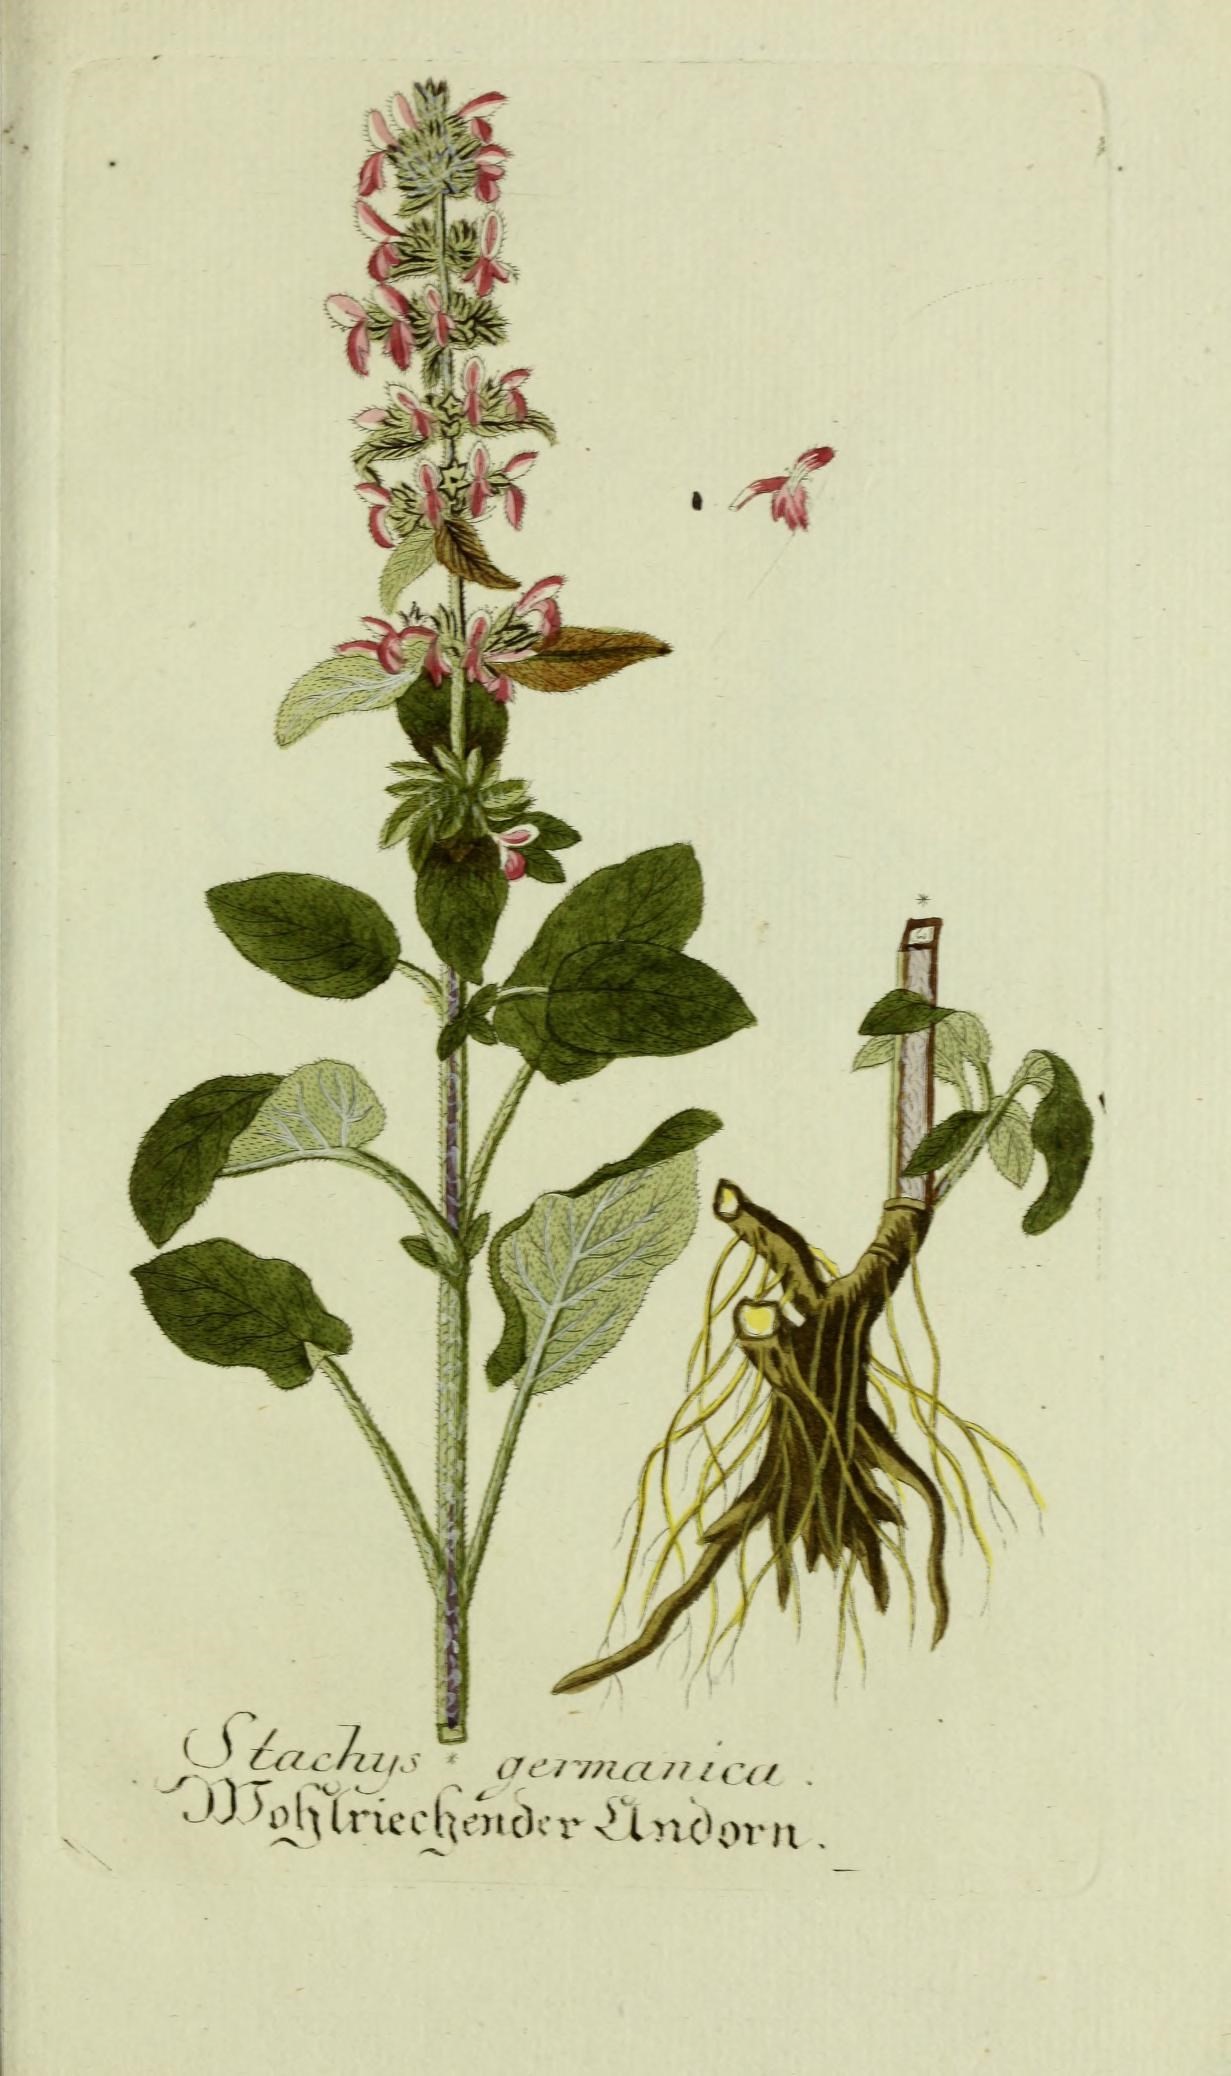 botanical illustration showing flowering plants with roots